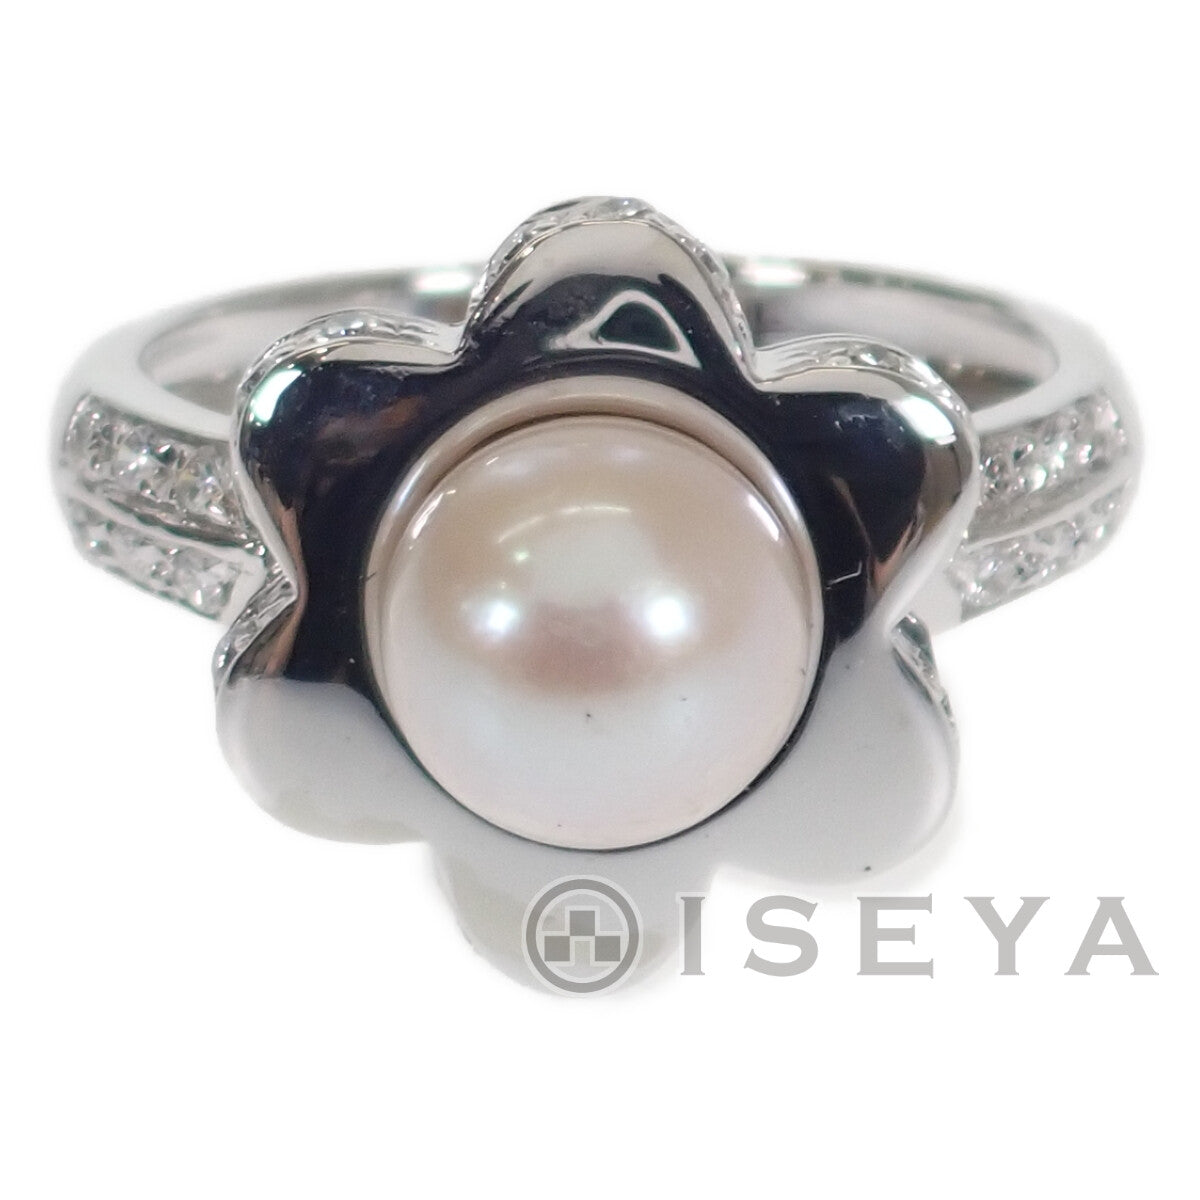 Ponte Vecchio Flower Motif Ring with Pearl & Diamond in K18 White Gold for Women, Size 9 (Used)